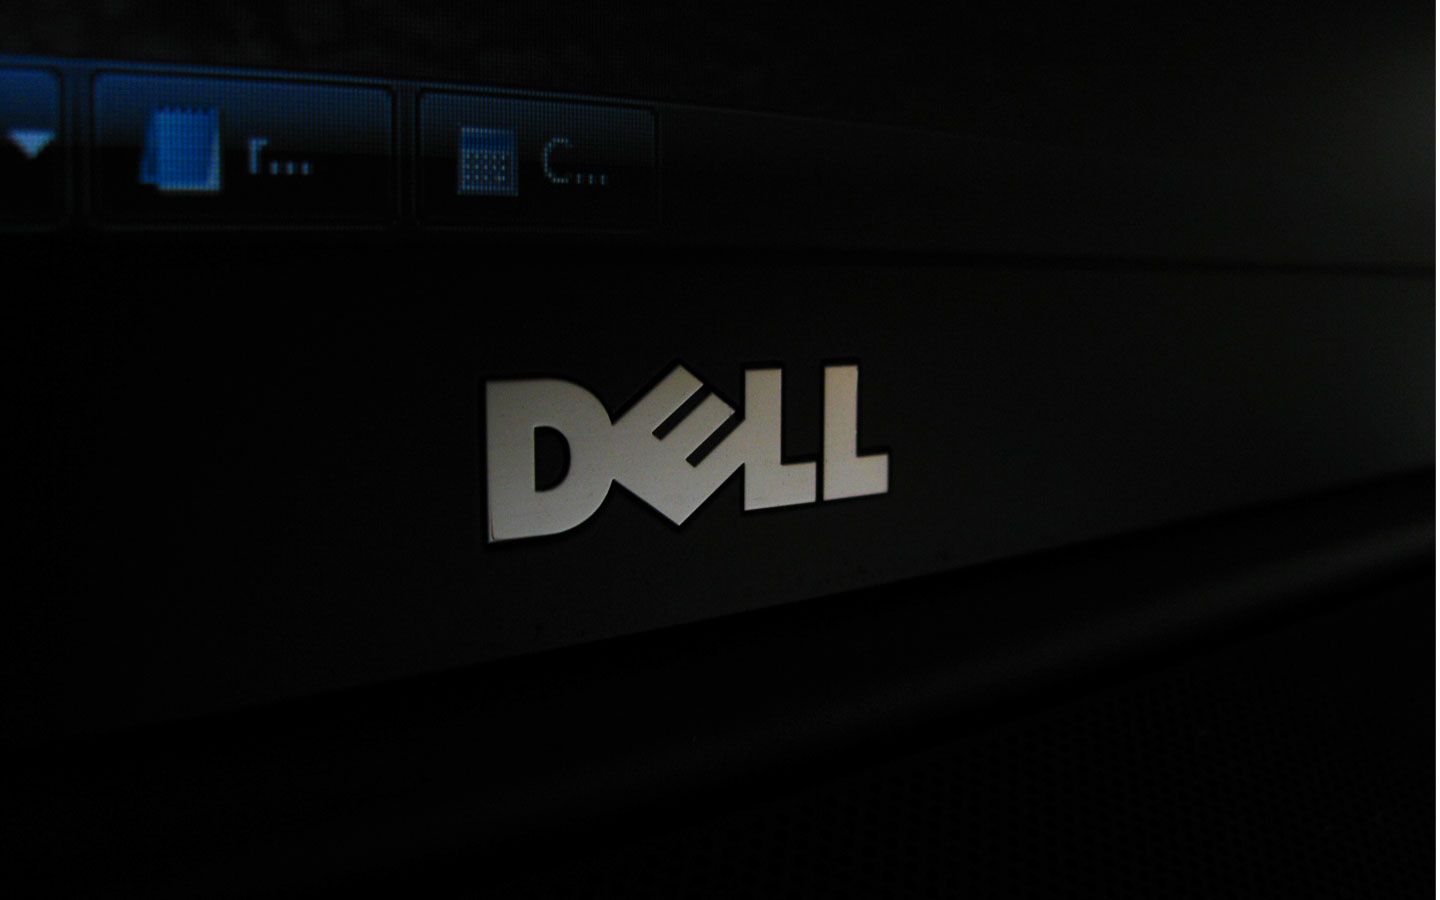 HD Dell Background Wallpaper Image For Windows